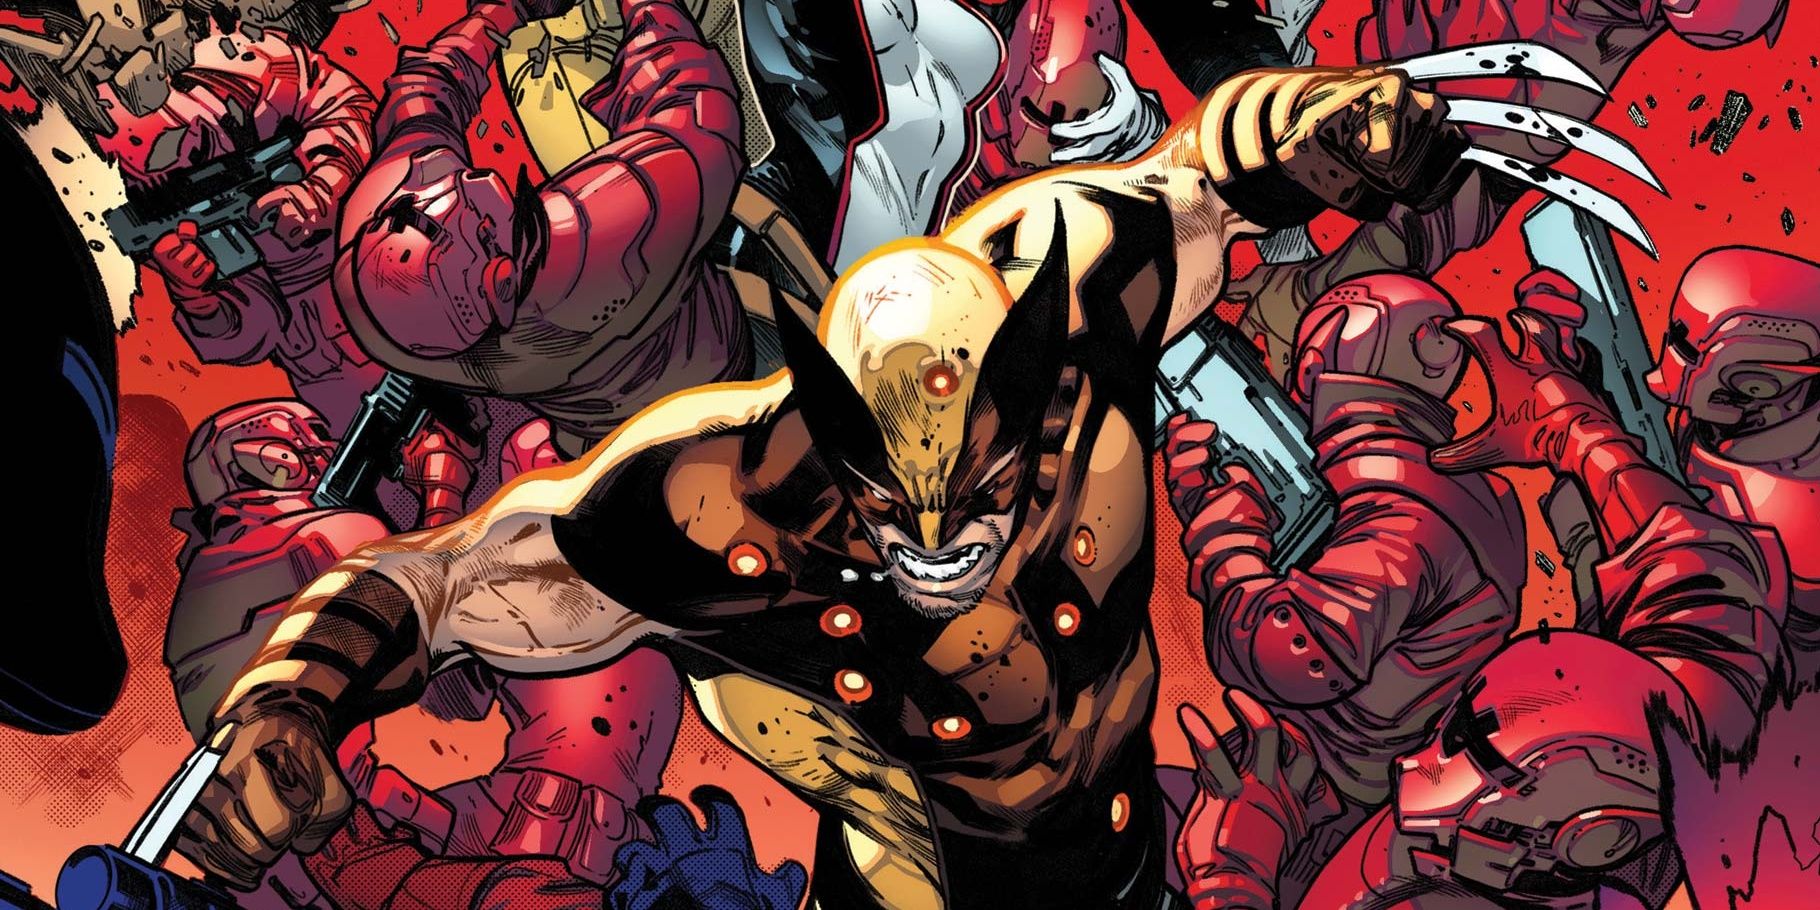 Wolverine battling Orchis soldiers in Marvel Comics